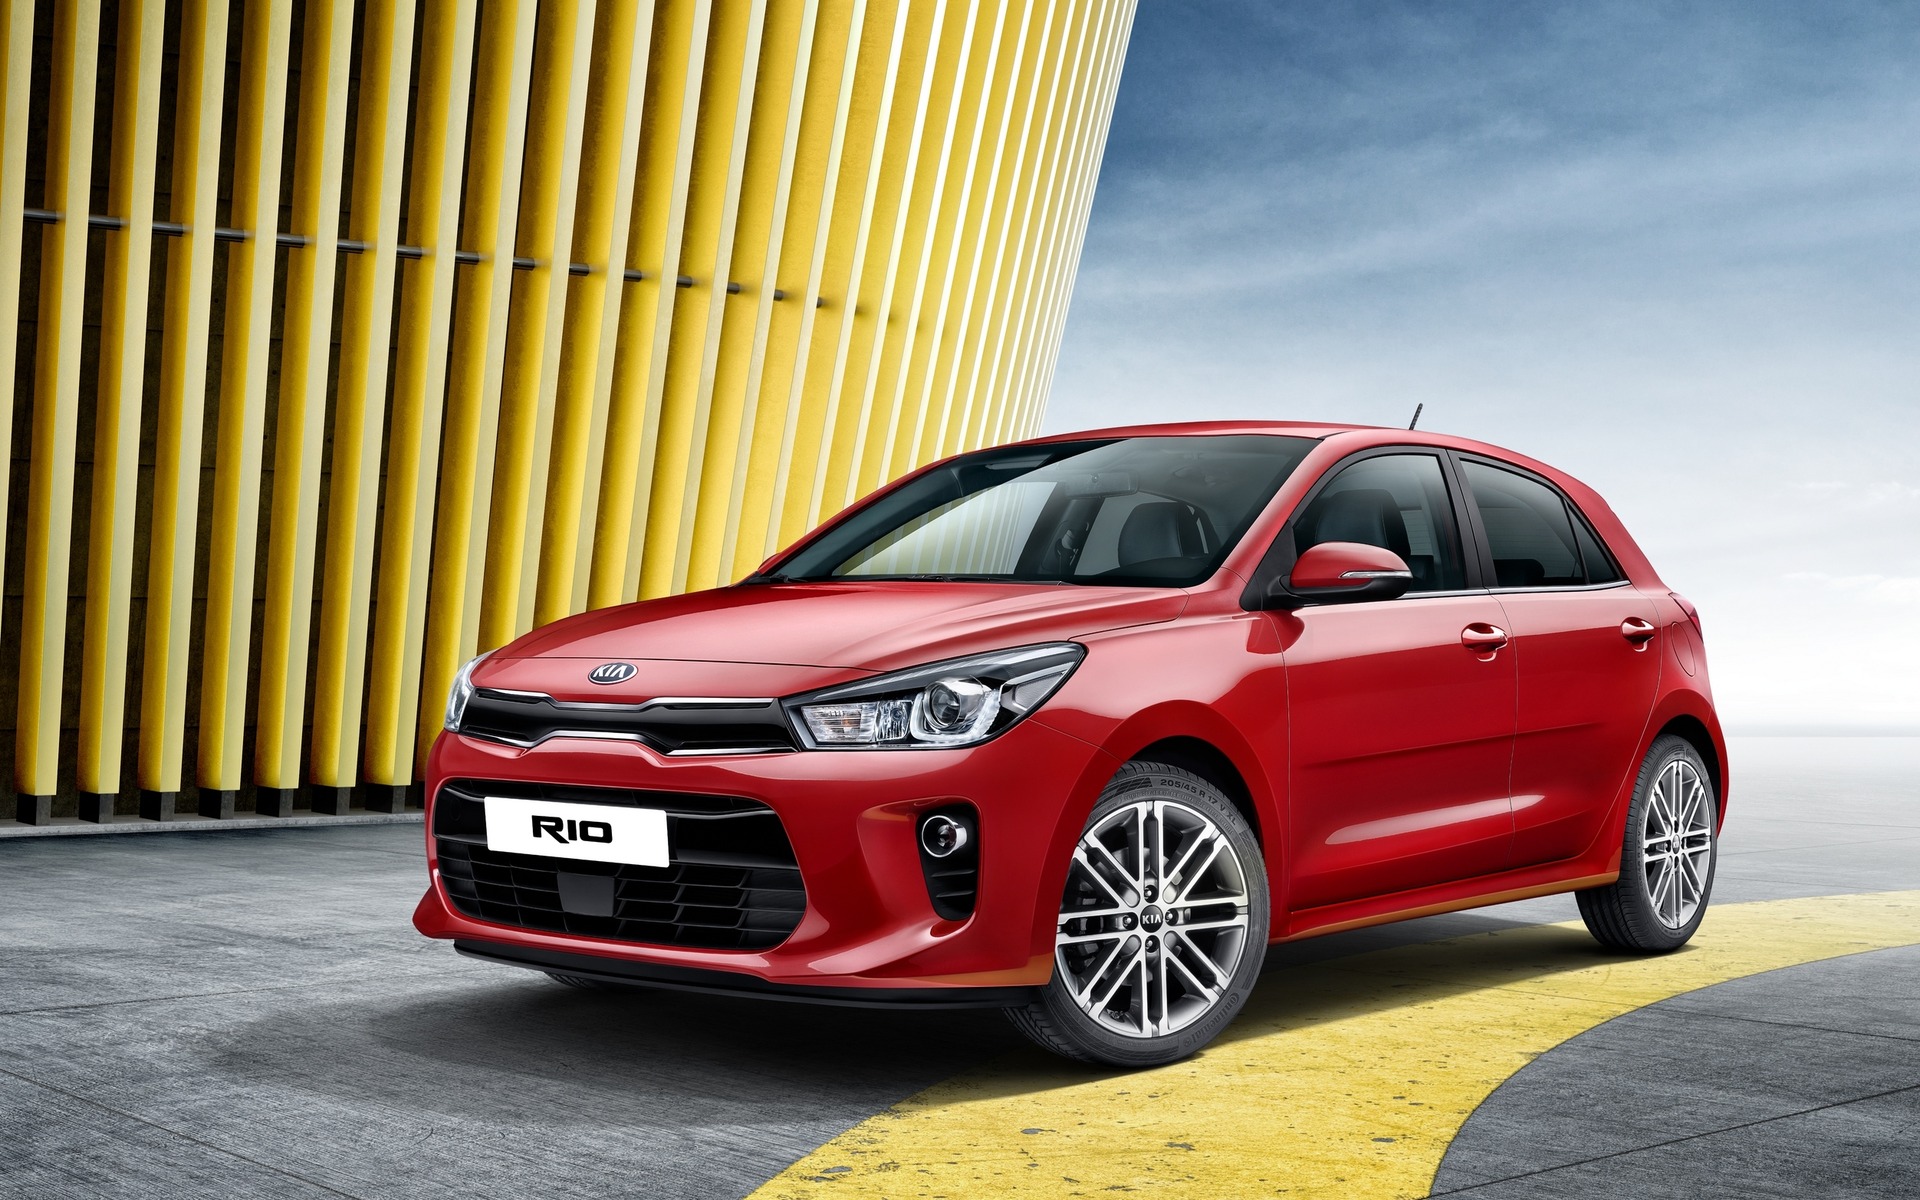 First pictures of the 2018 Kia Rio - The Car Guide